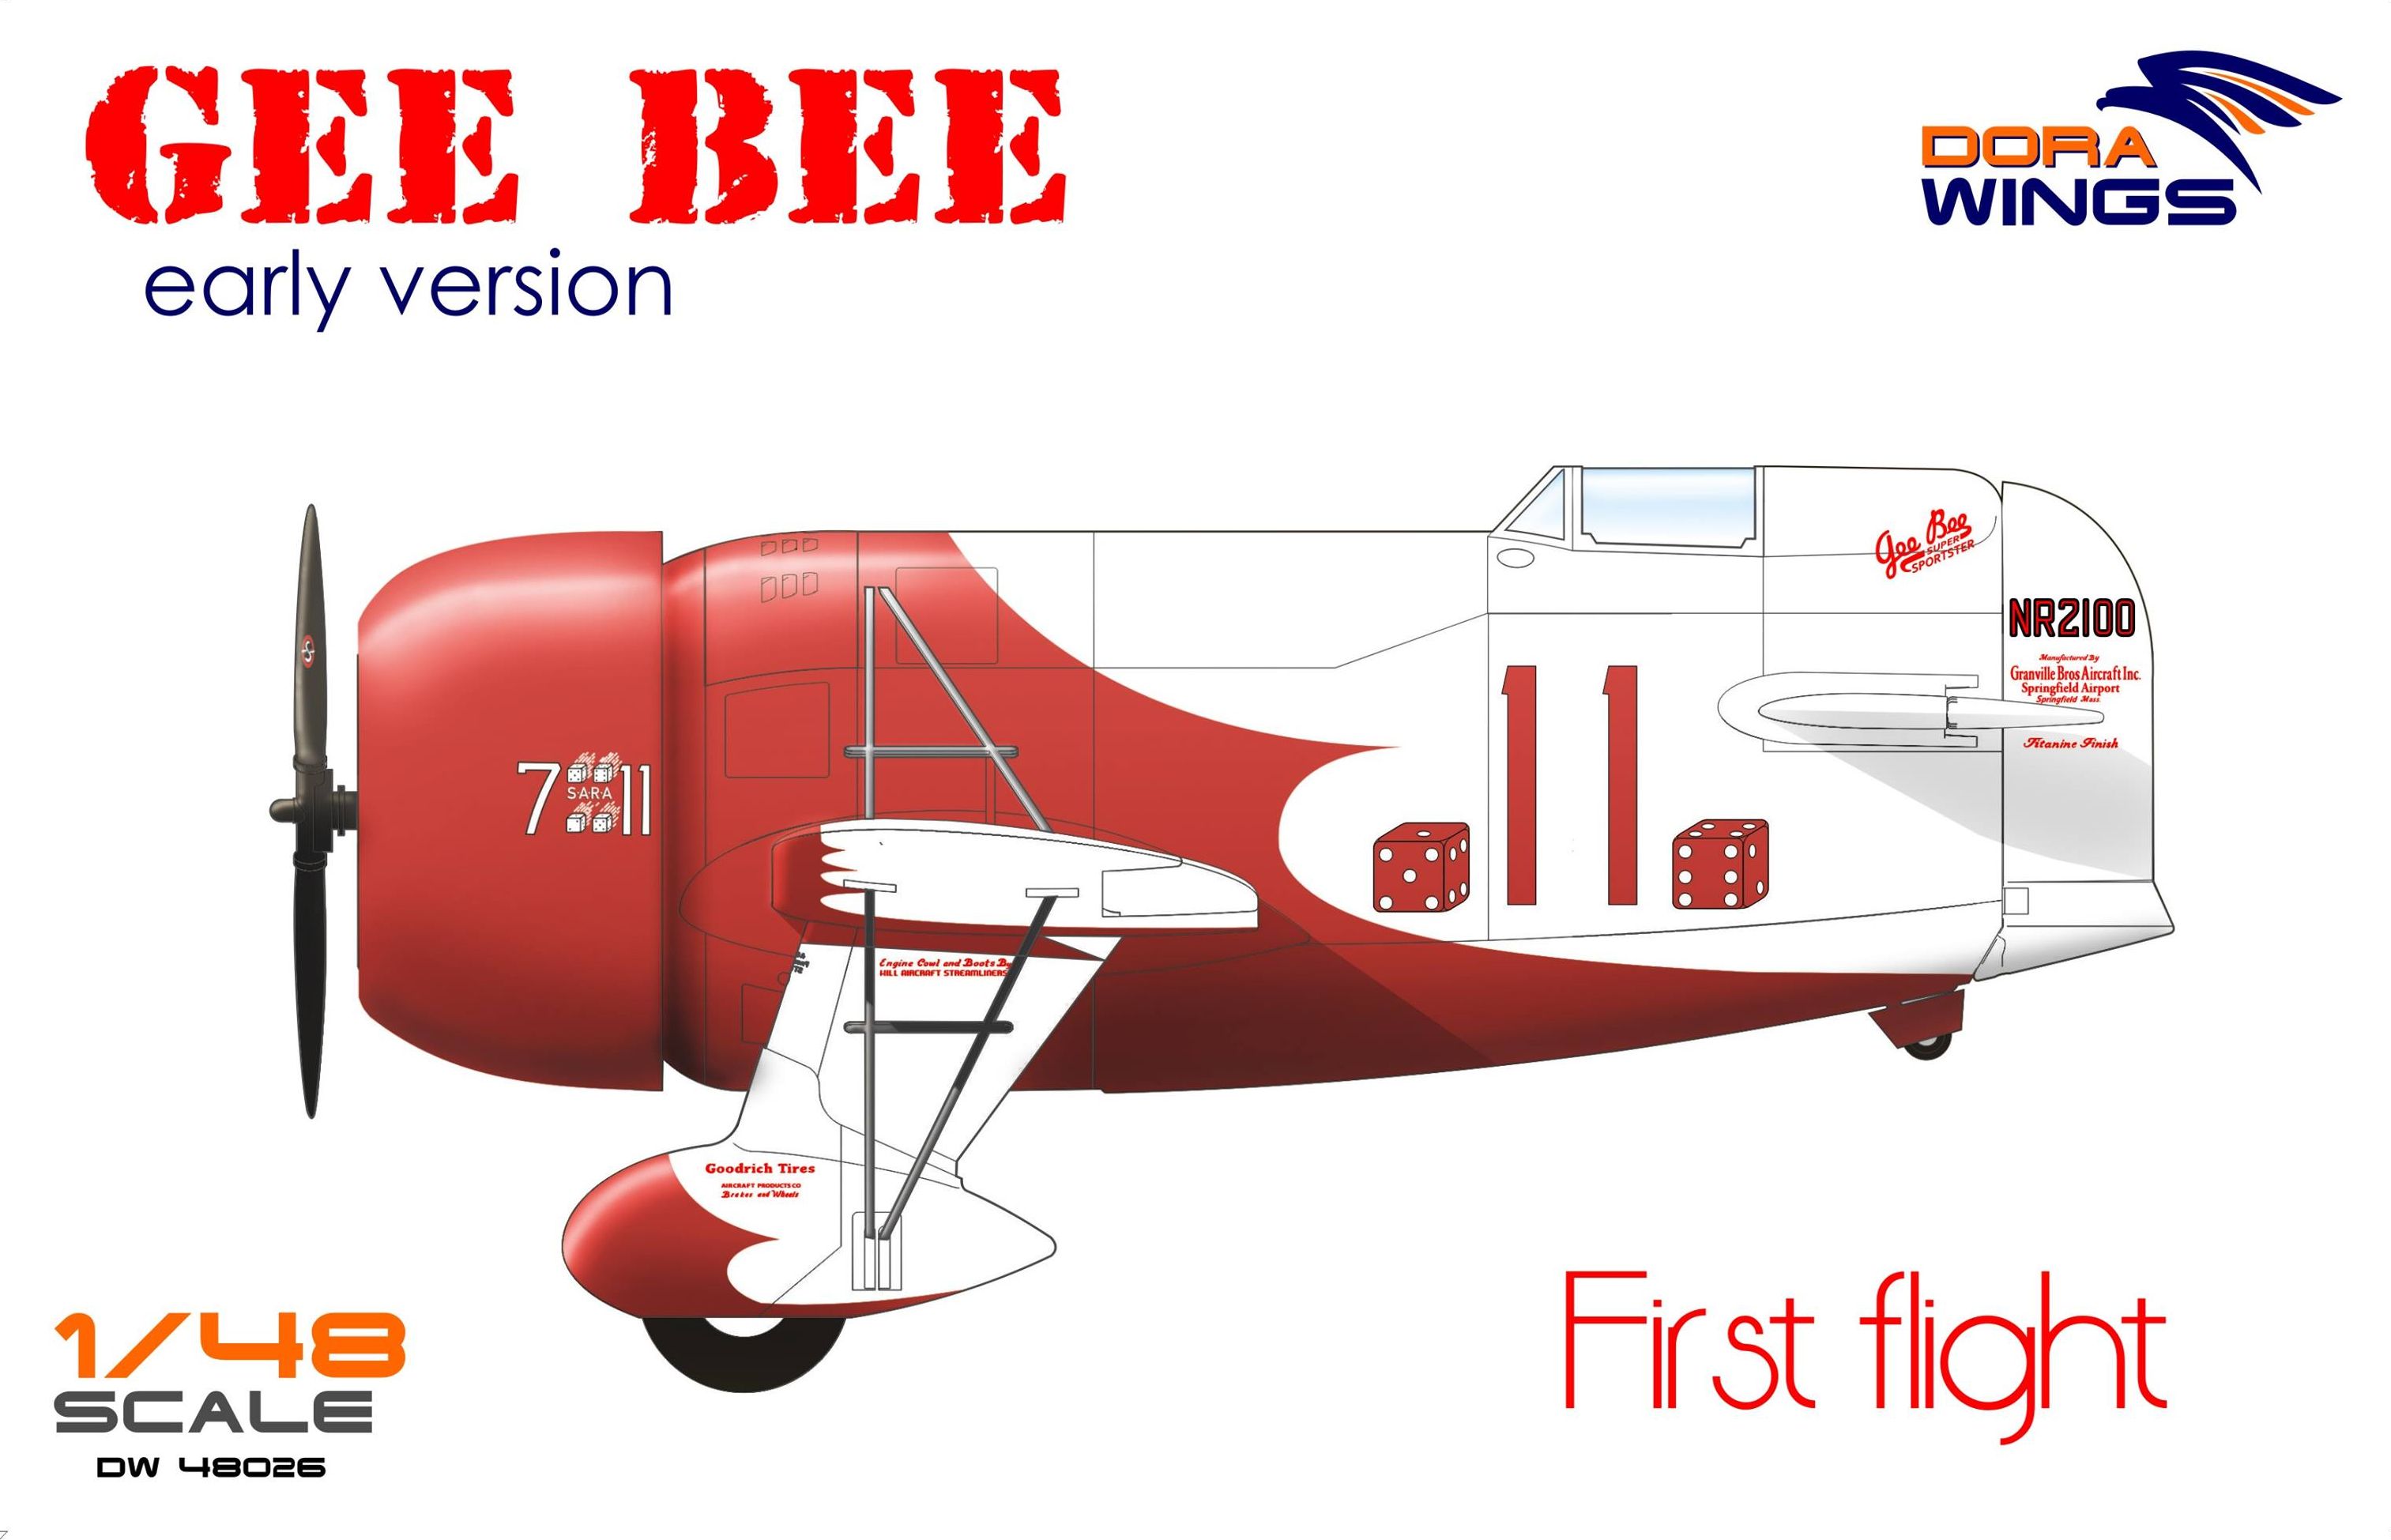 Gee Bee Super Sportster R-1 (early version)